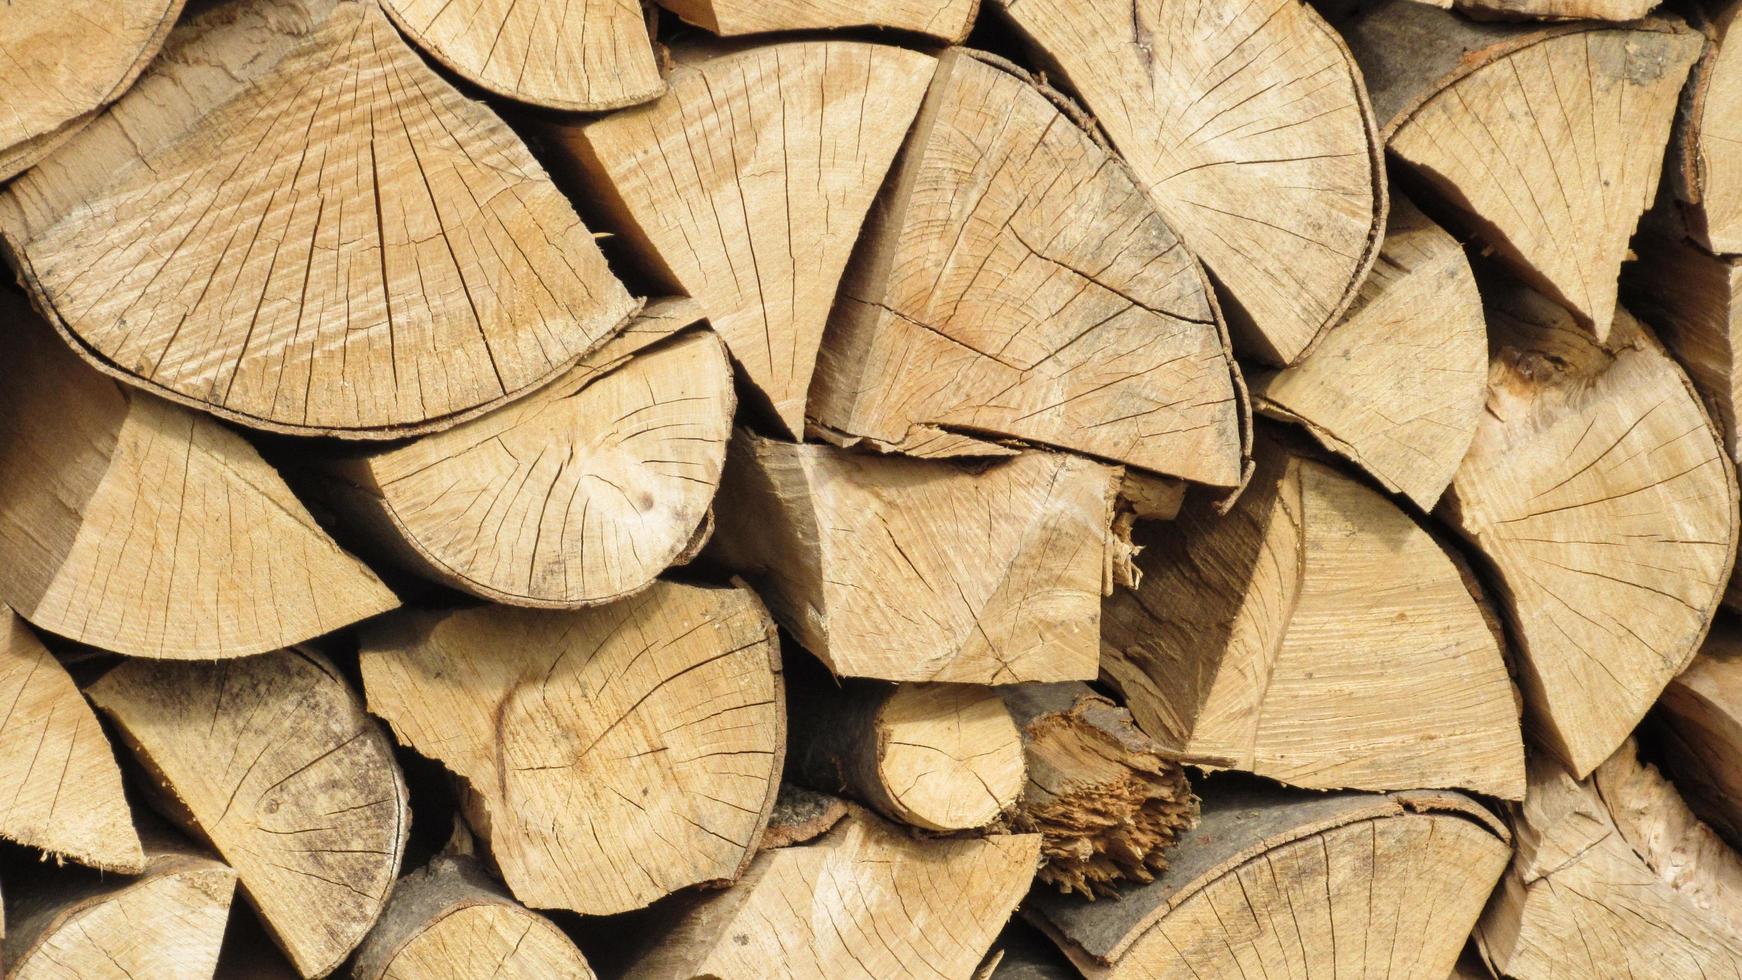 stack of firewood. Chopped wooden logs stacked in the woodpile photo